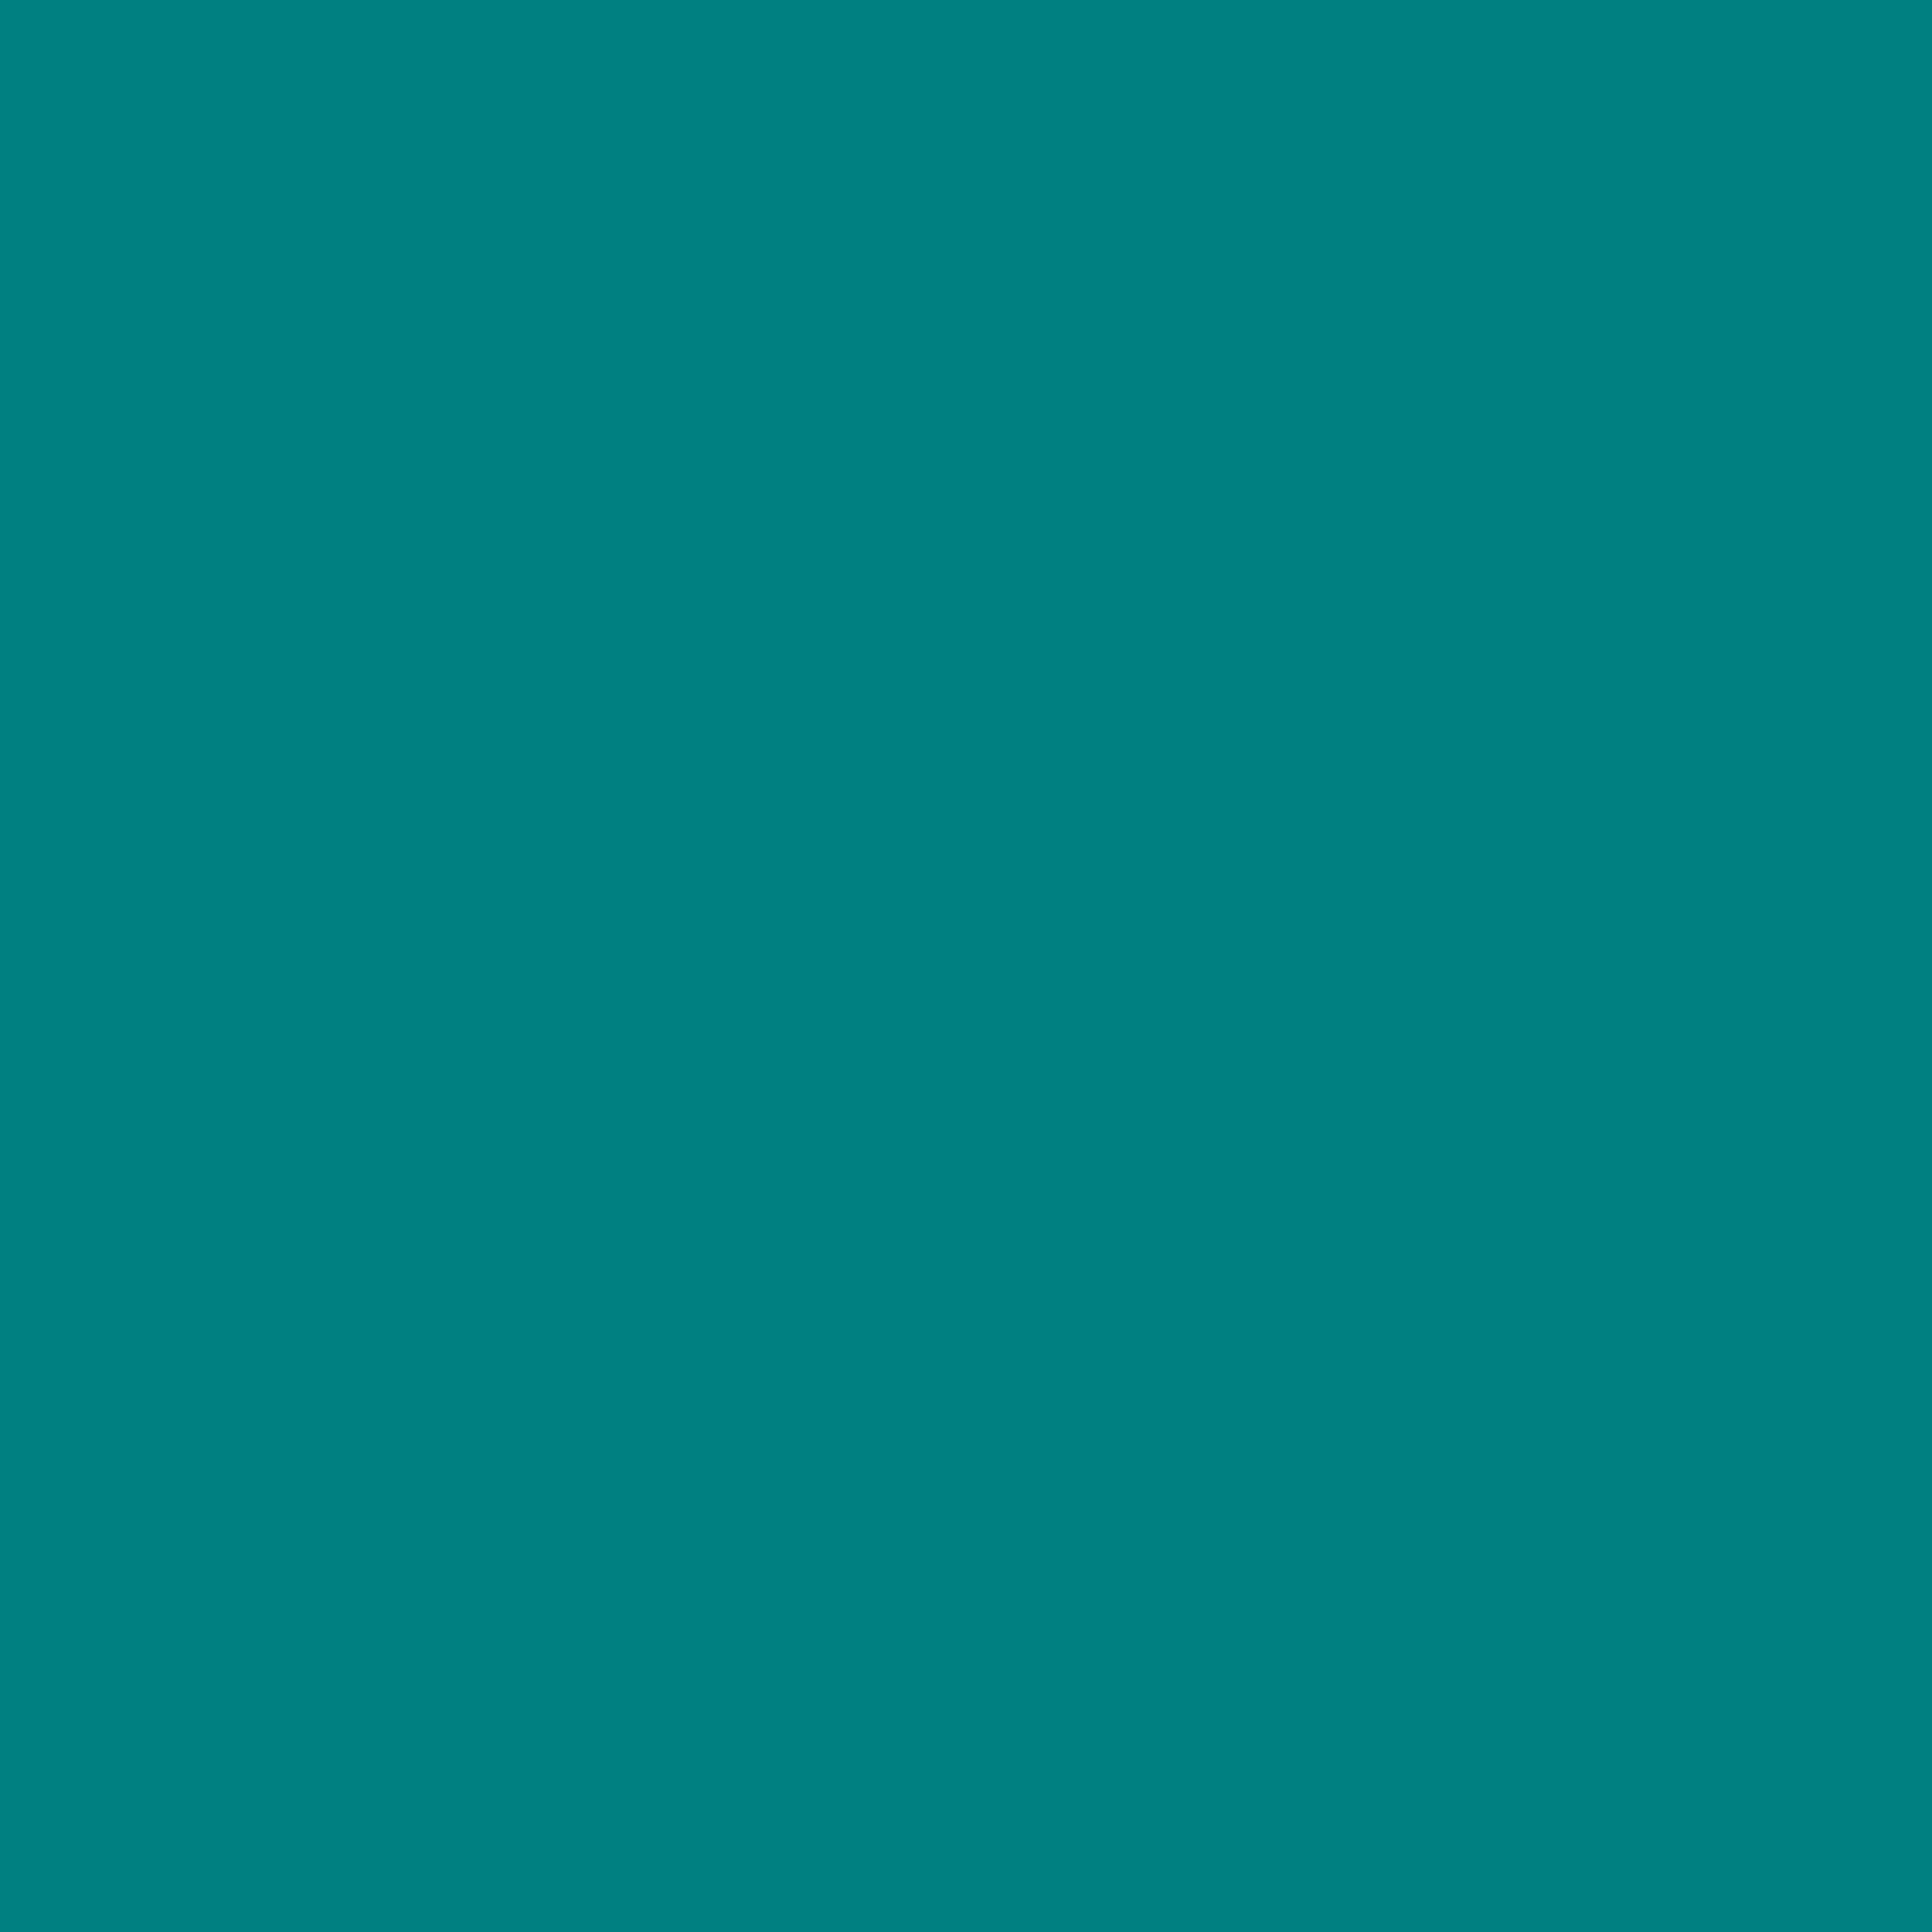 2732x2732 Teal Solid Color Background